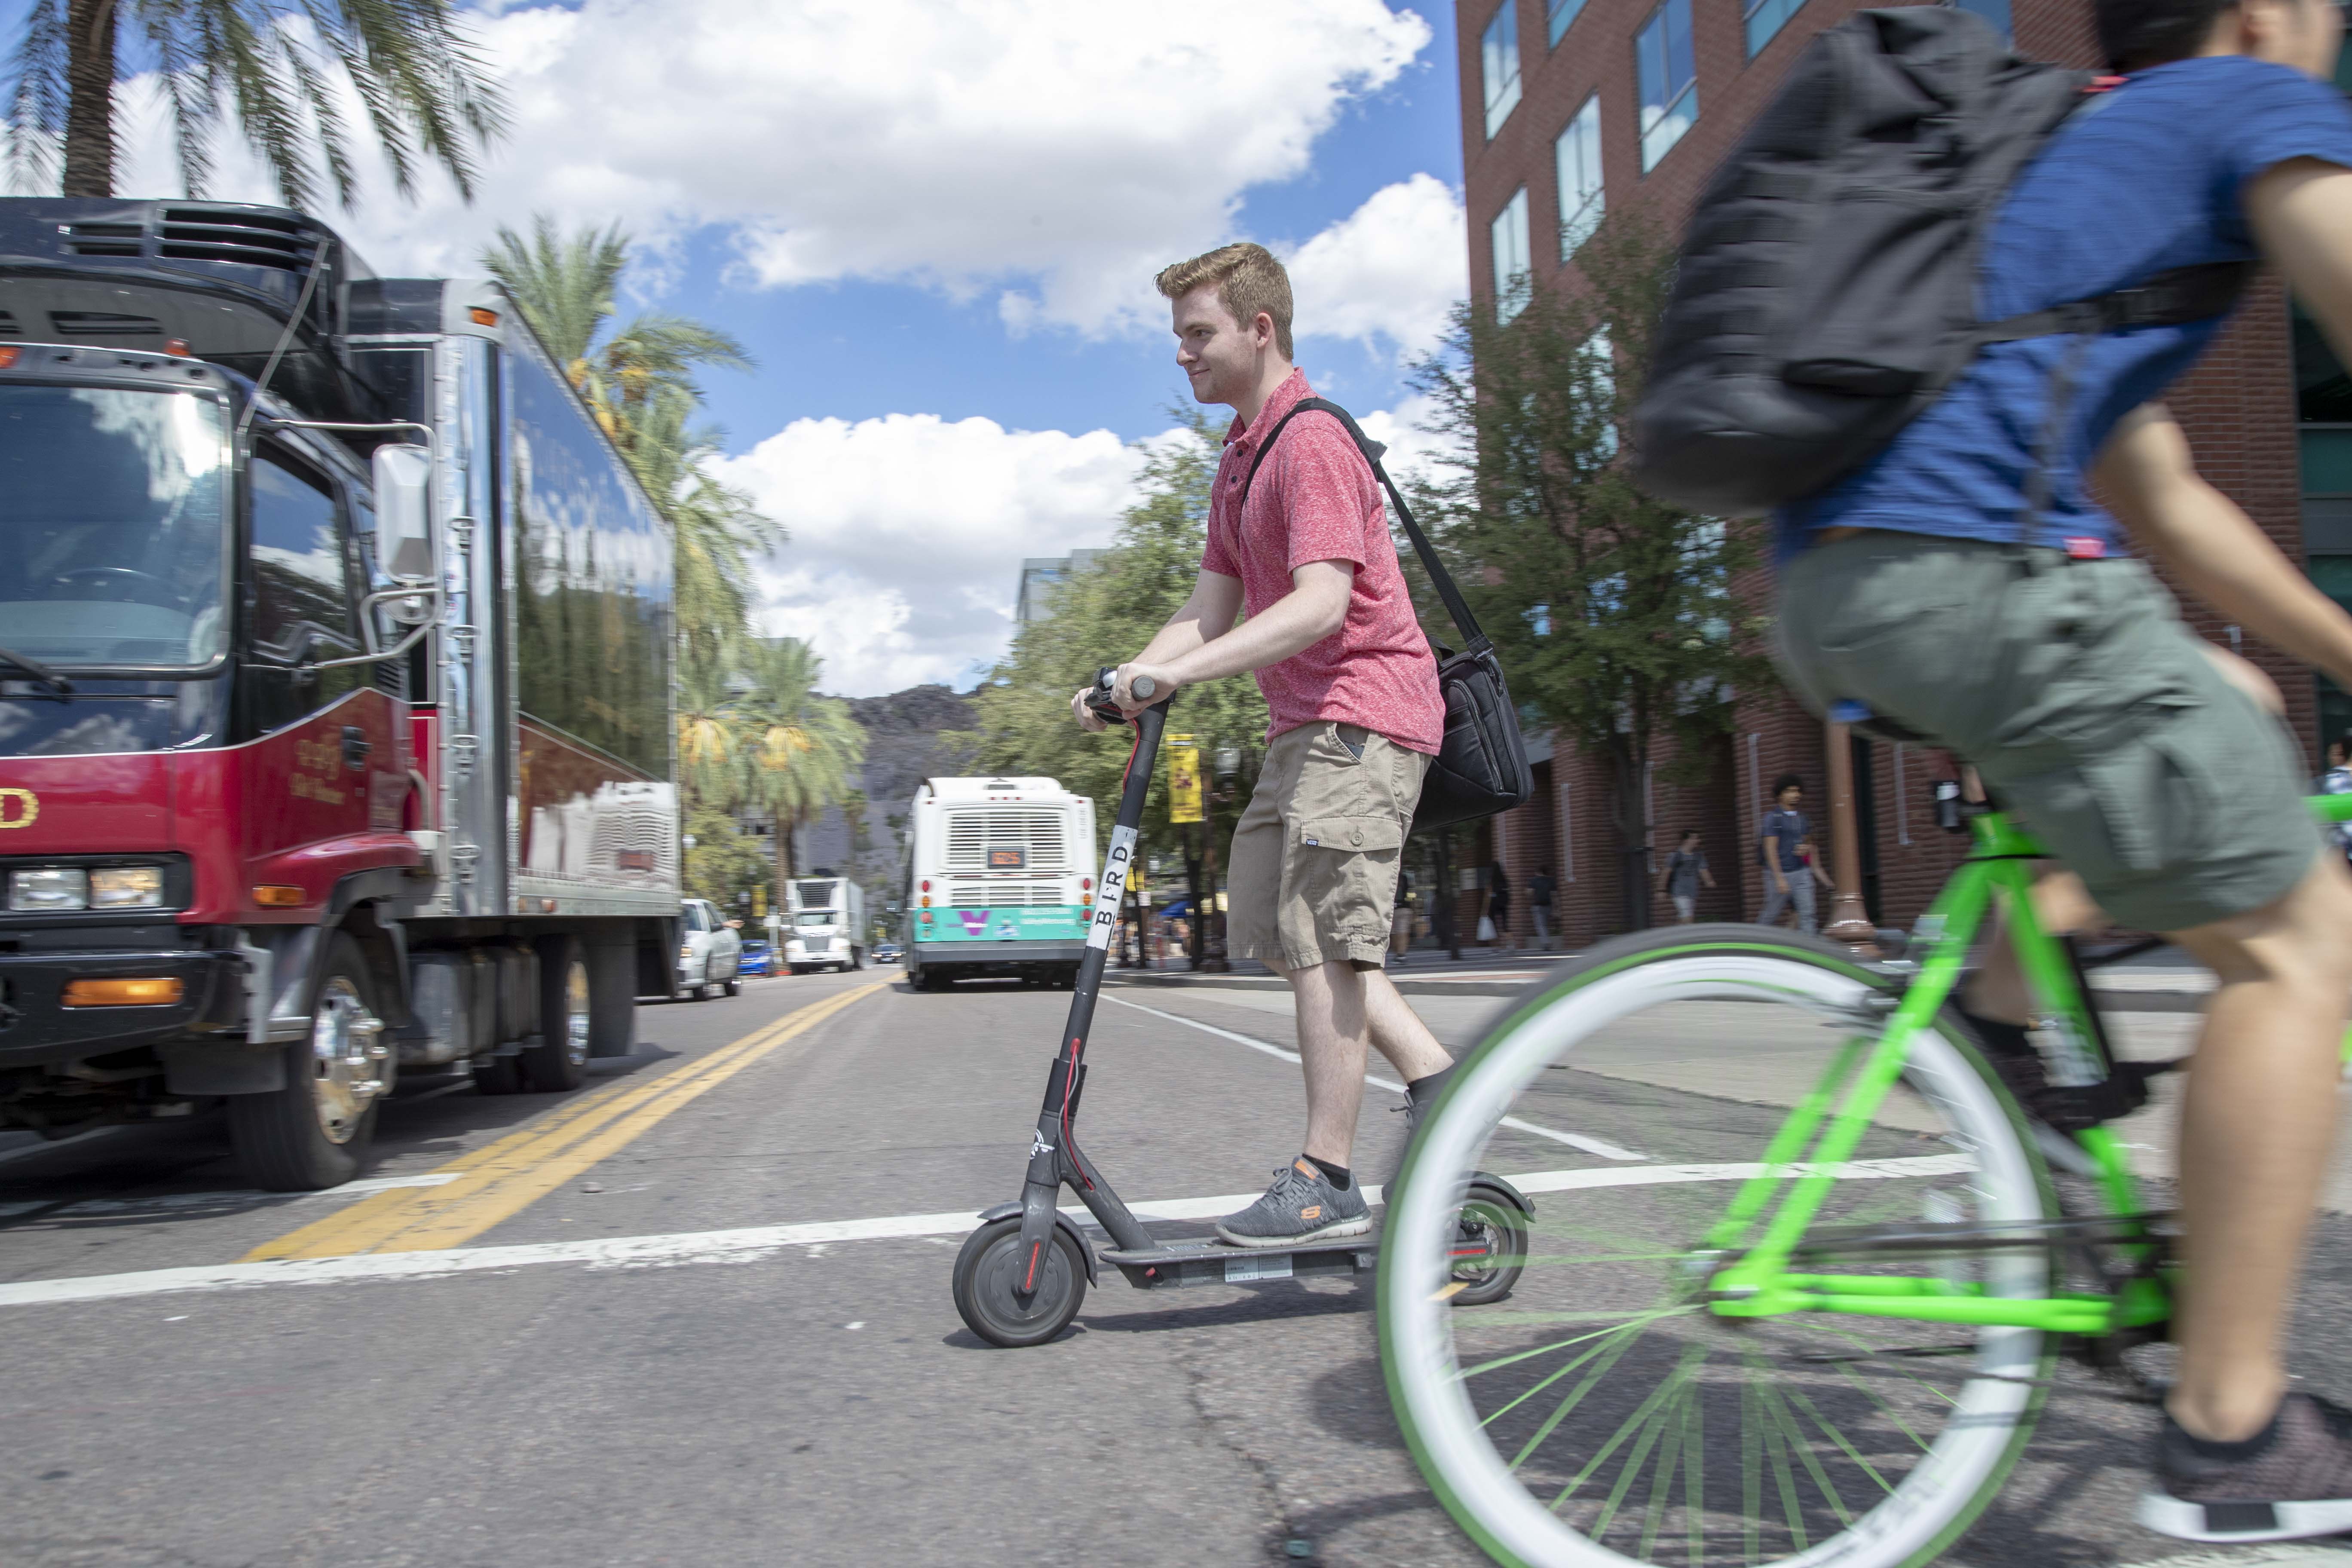 ASU to electric scooter companies: Get off the Tempe campus